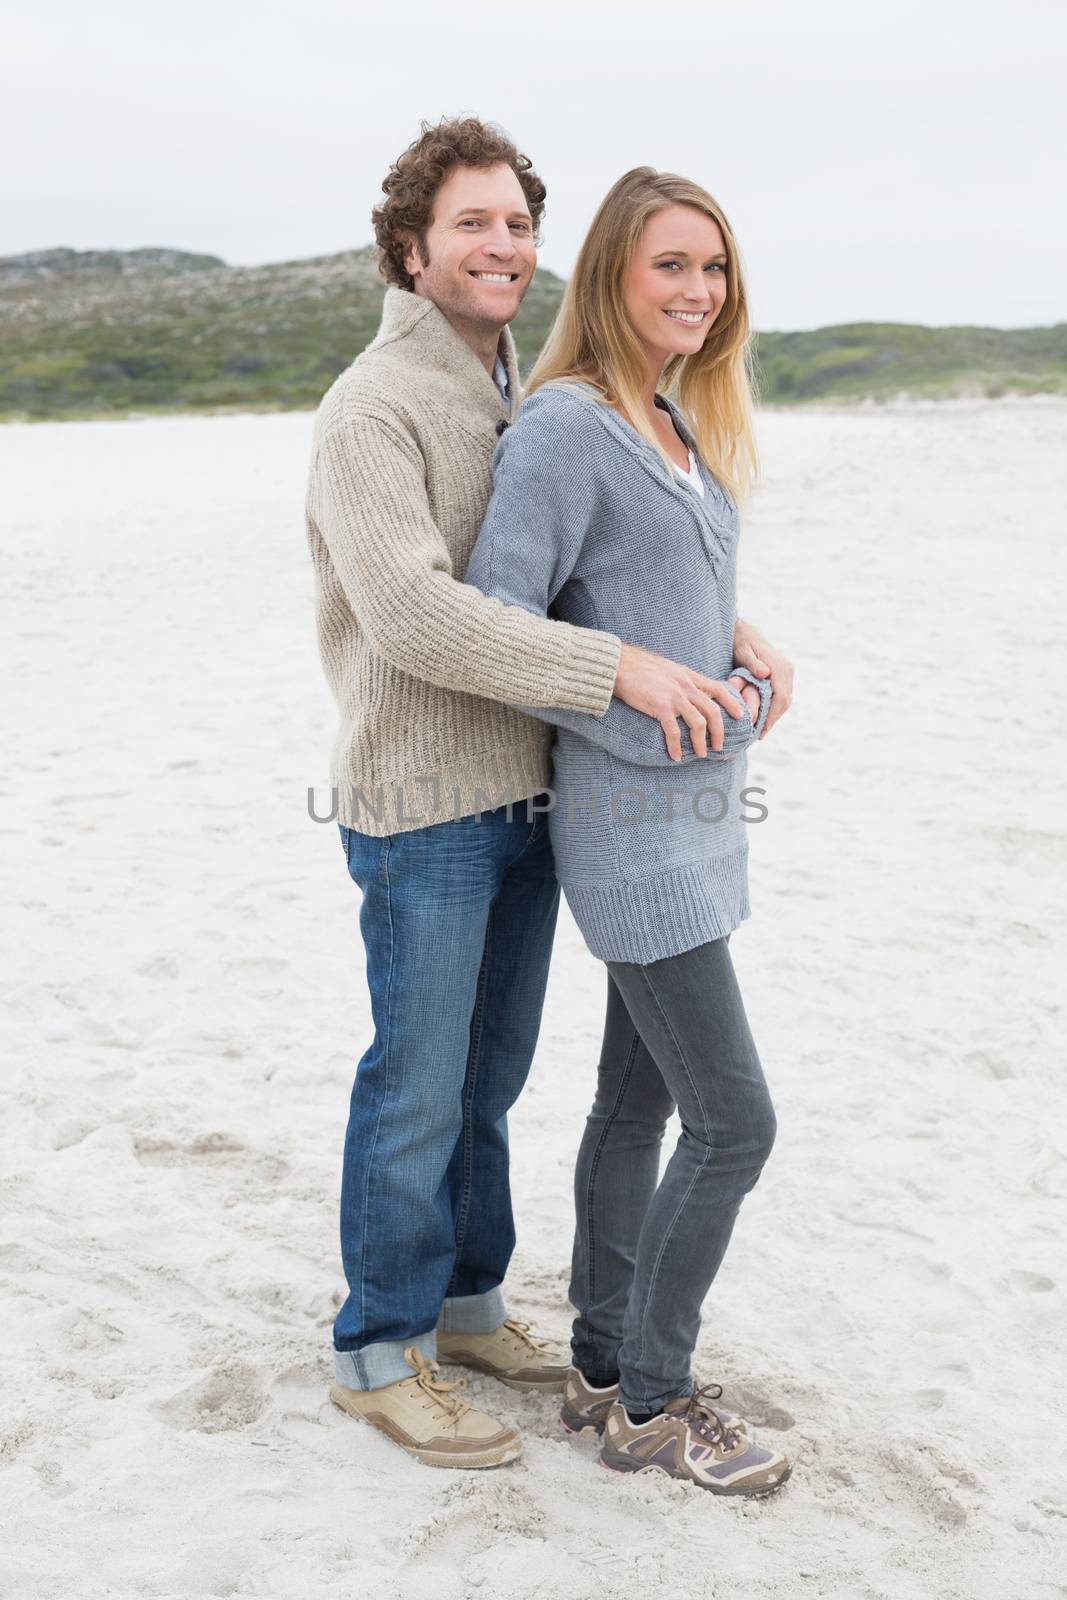 Full length portrait of a relaxed romantic young couple standing together at the beach